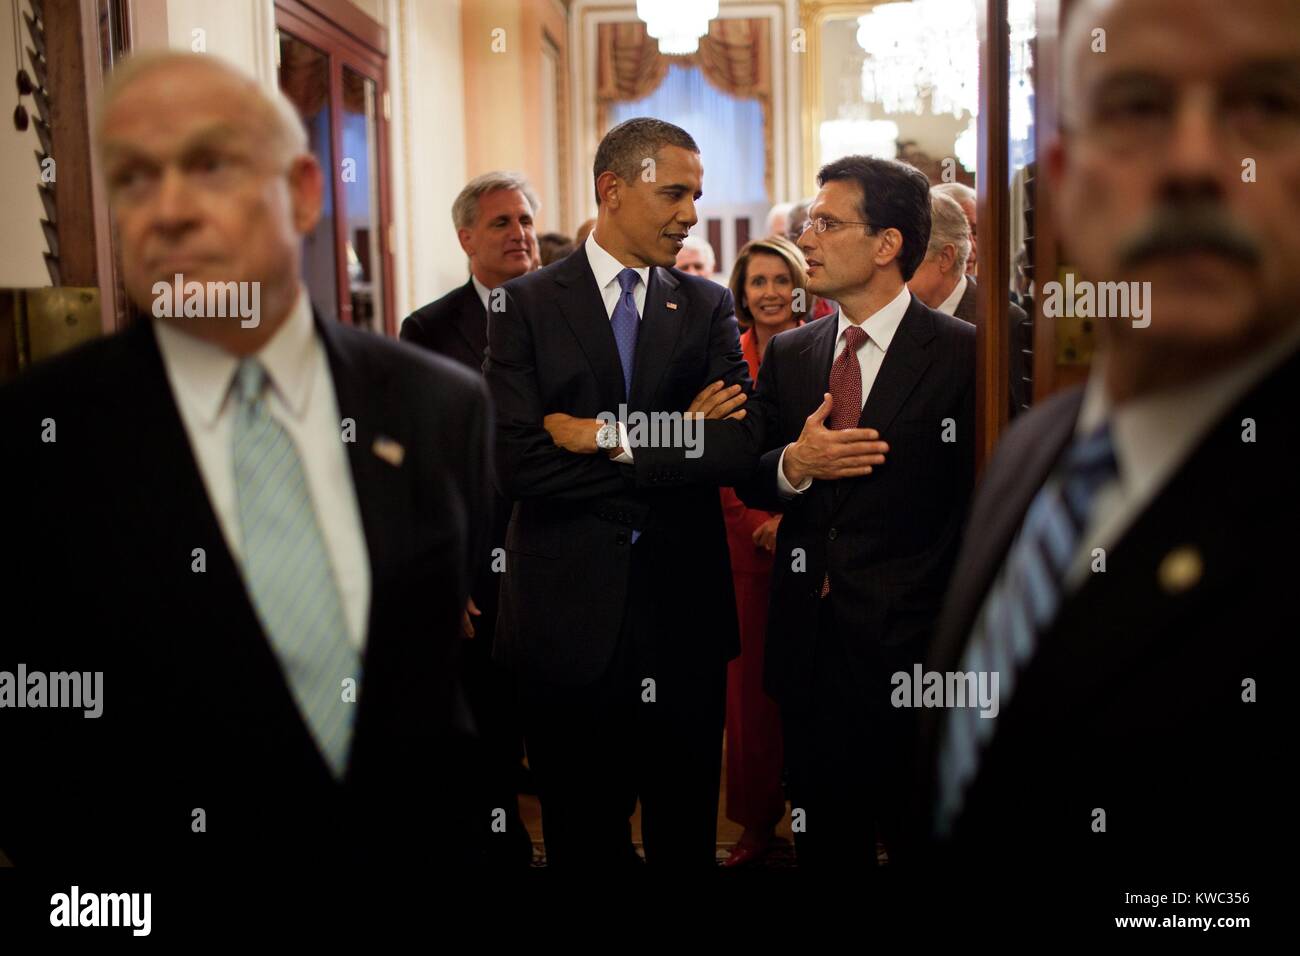 President Barack Obama talks with Rep. Eric Cantor, prior to entering the House Chamber. Sept. 8, 2011, before Obama's address to a Joint Session of Congress to outline the American Jobs Act. House Democratic leader Nancy Pelosi is in background. (BSLOC 2015 13 220) Stock Photo